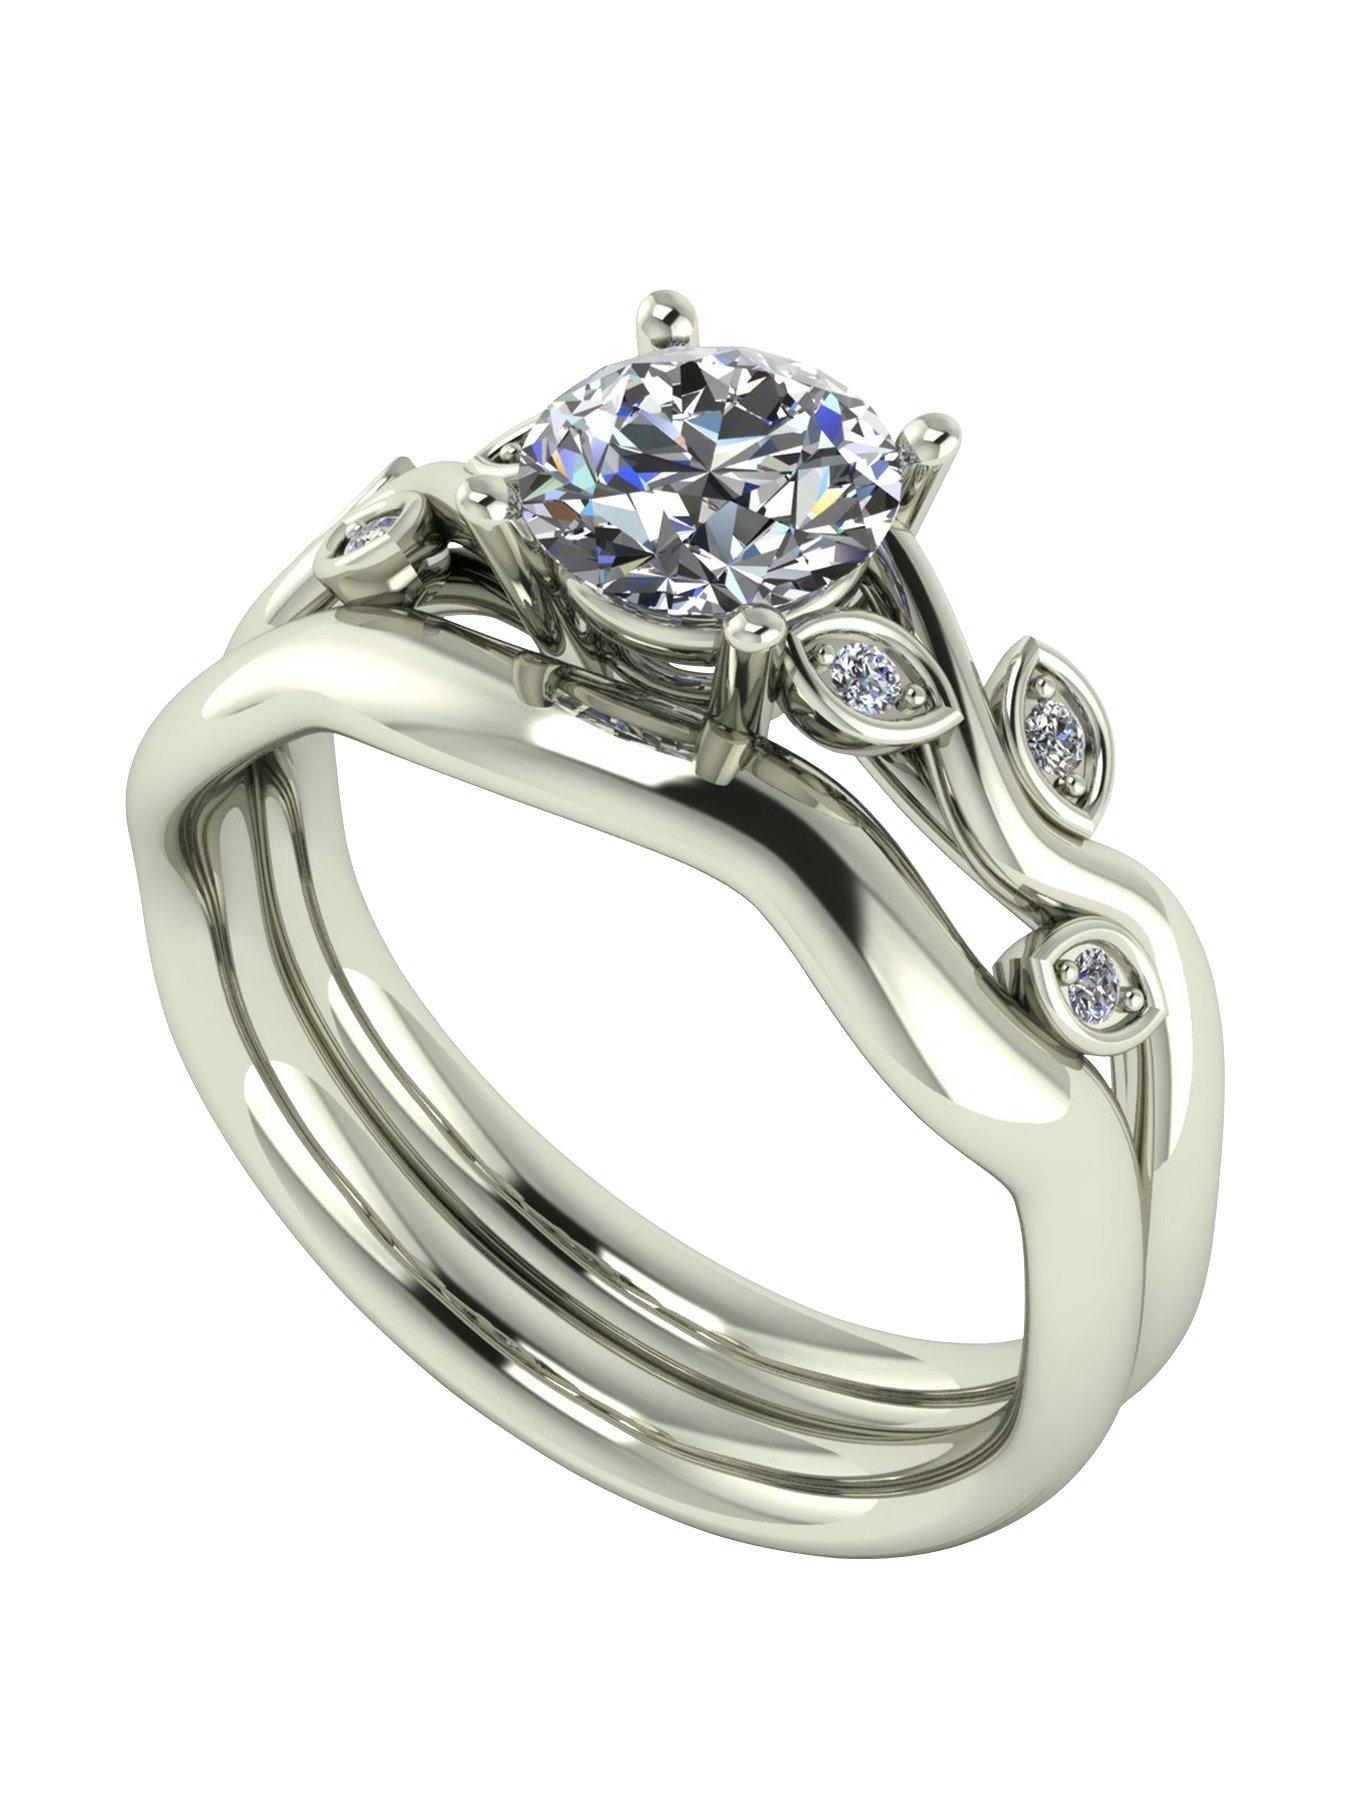 Details about   1.5 CT Classic Diamond Solitaire Engagement Ring Sterling Silver Platinum Finish